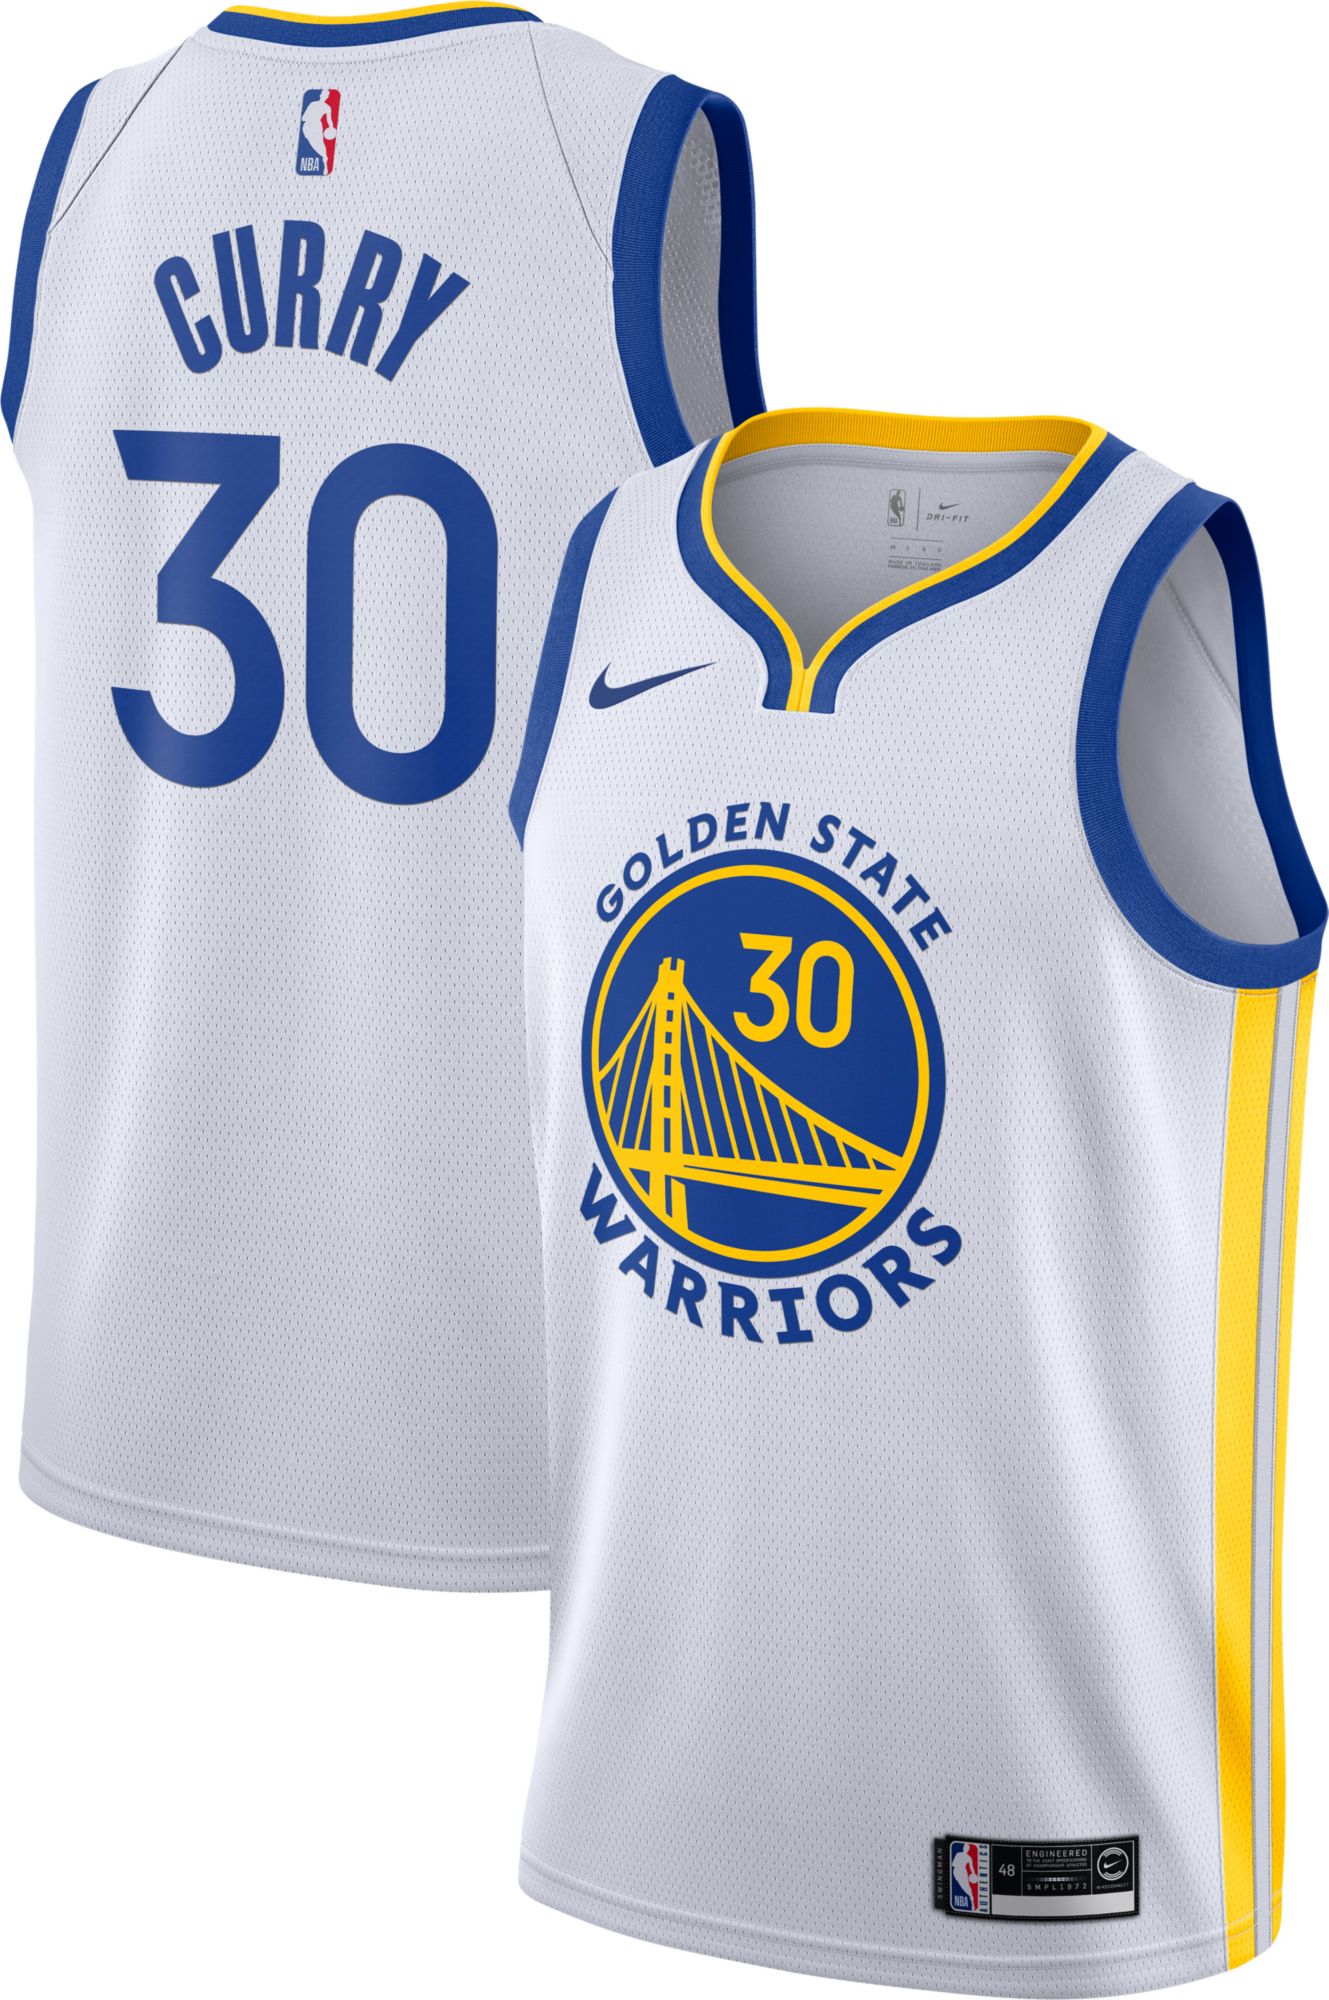 stephen curry jersey price